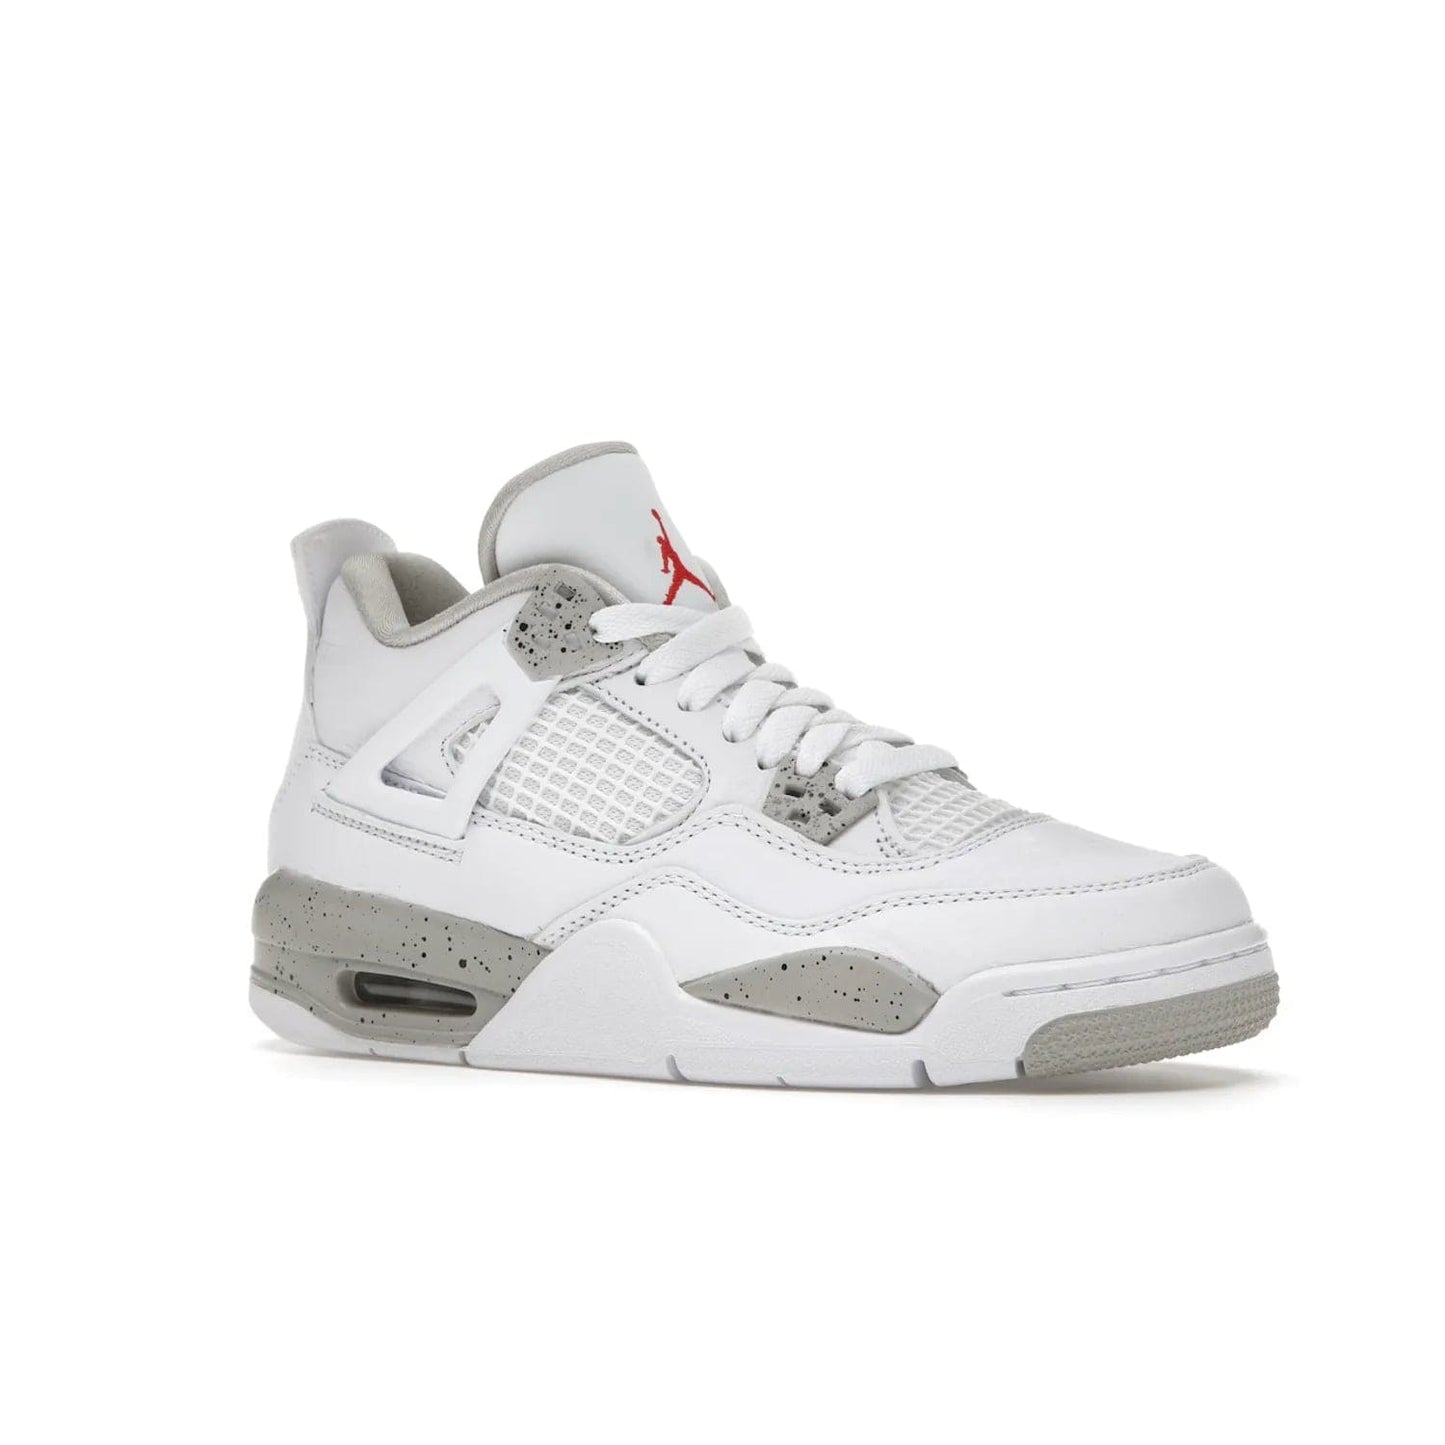 Jordan 4 Retro White Oreo (2021) (GS) - Image 4 - Only at www.BallersClubKickz.com - White Oreo Air Jordan 4 Retro 2021 GS - Iconic sneaker silhouette with white canvas upper, Tech Grey detailing, and Fire Red accents. Available July 2021.